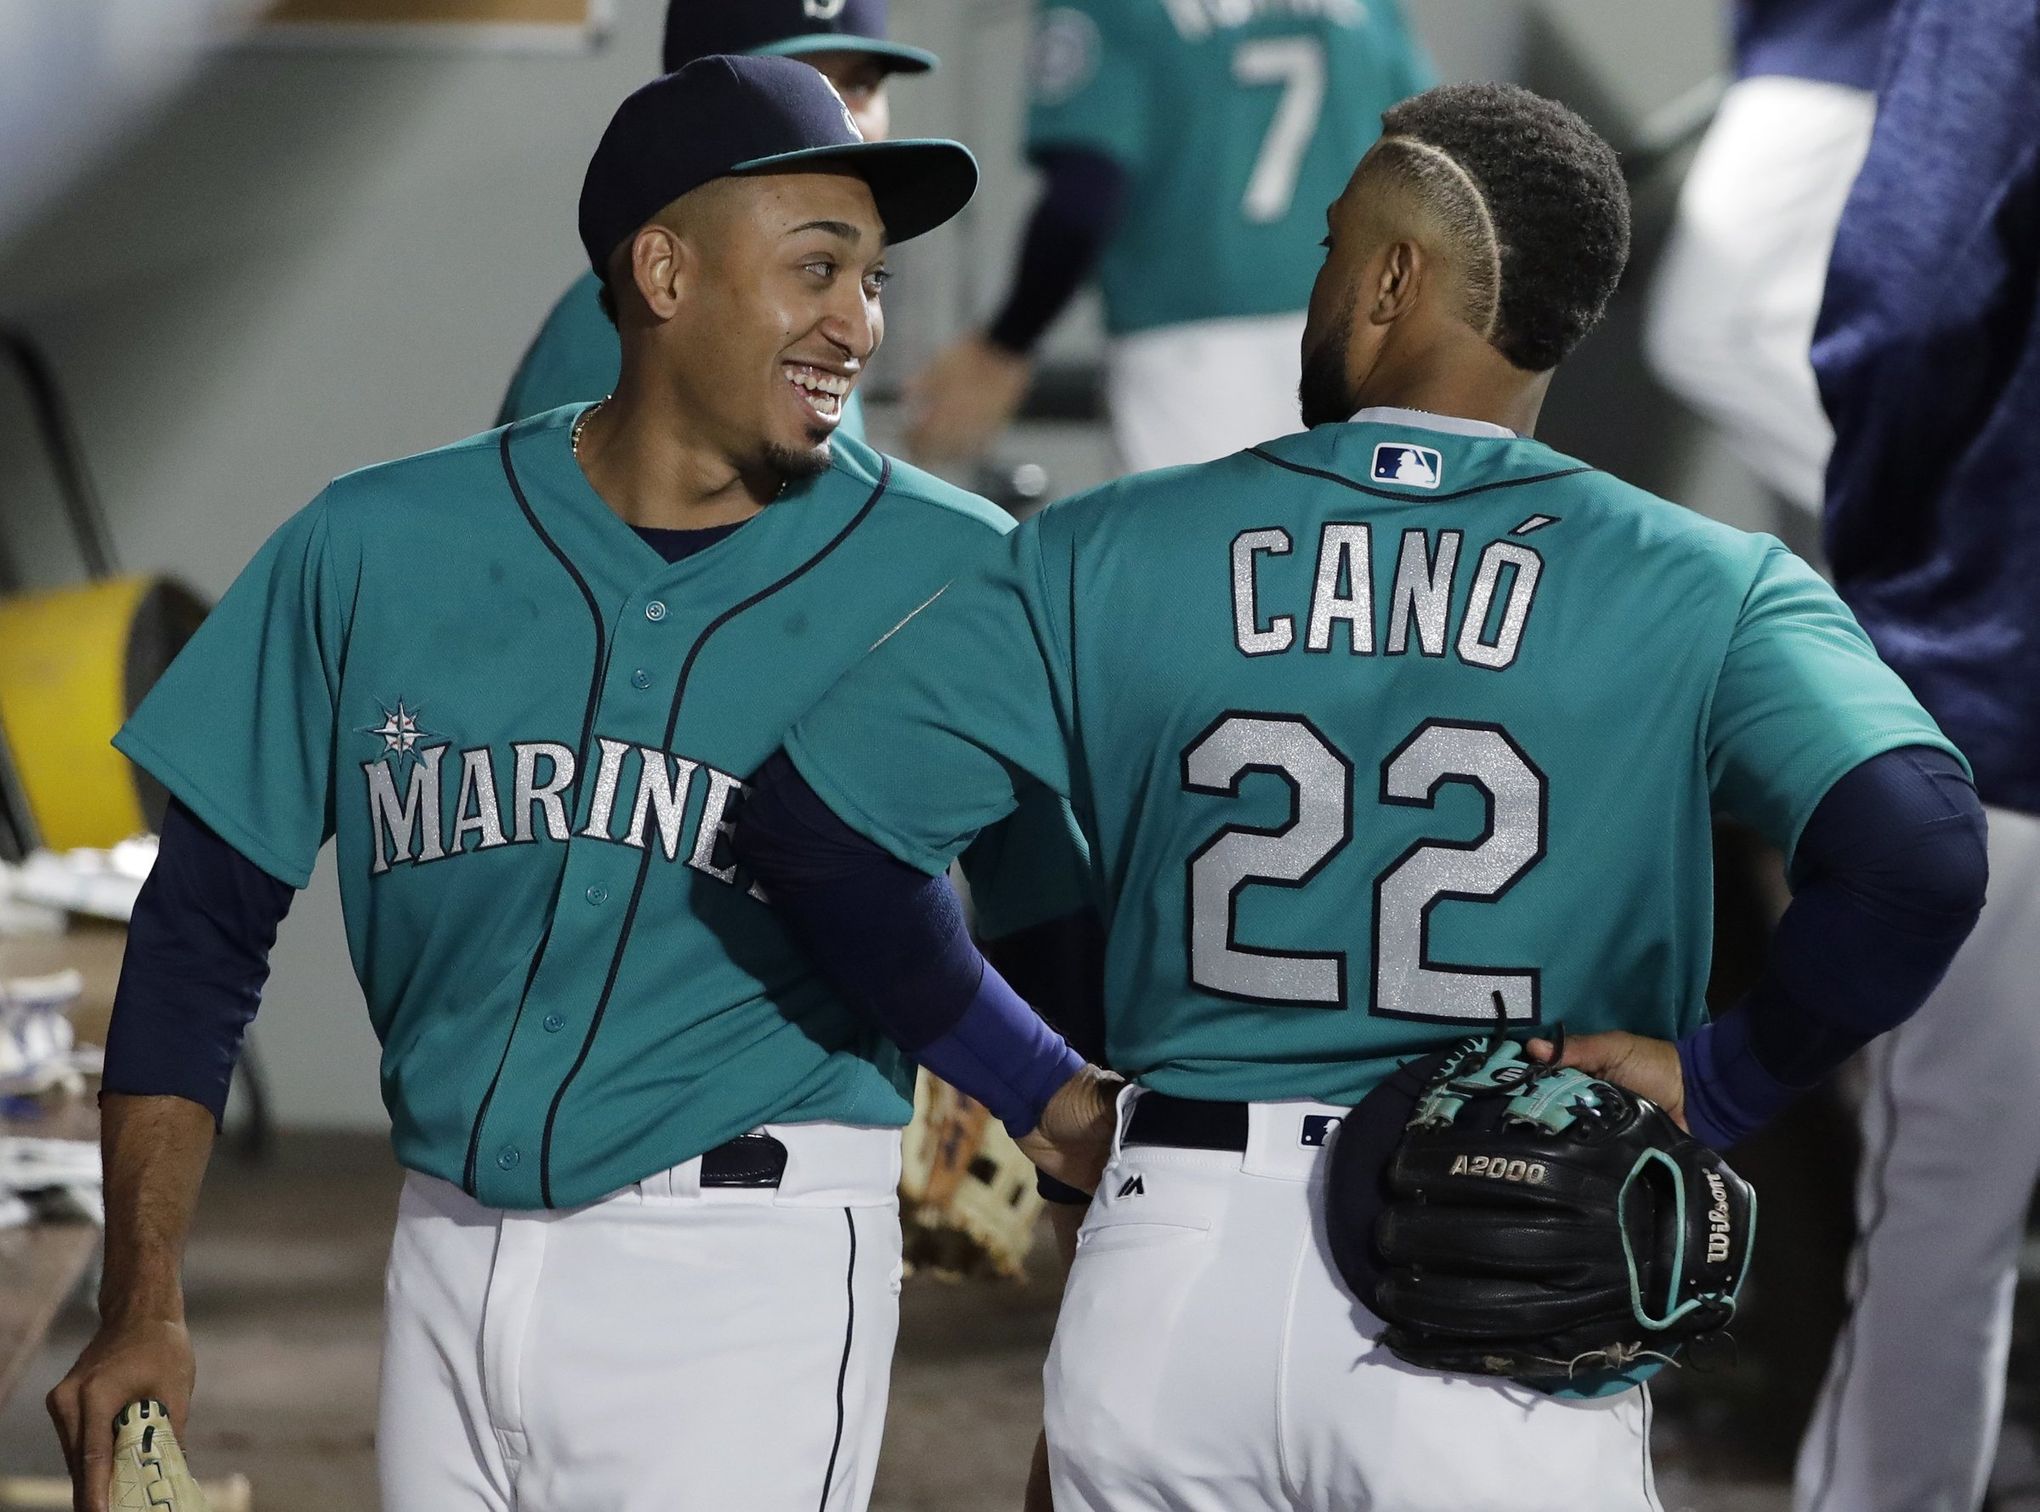 Looking back at the Robinson Cano trade now that he's been